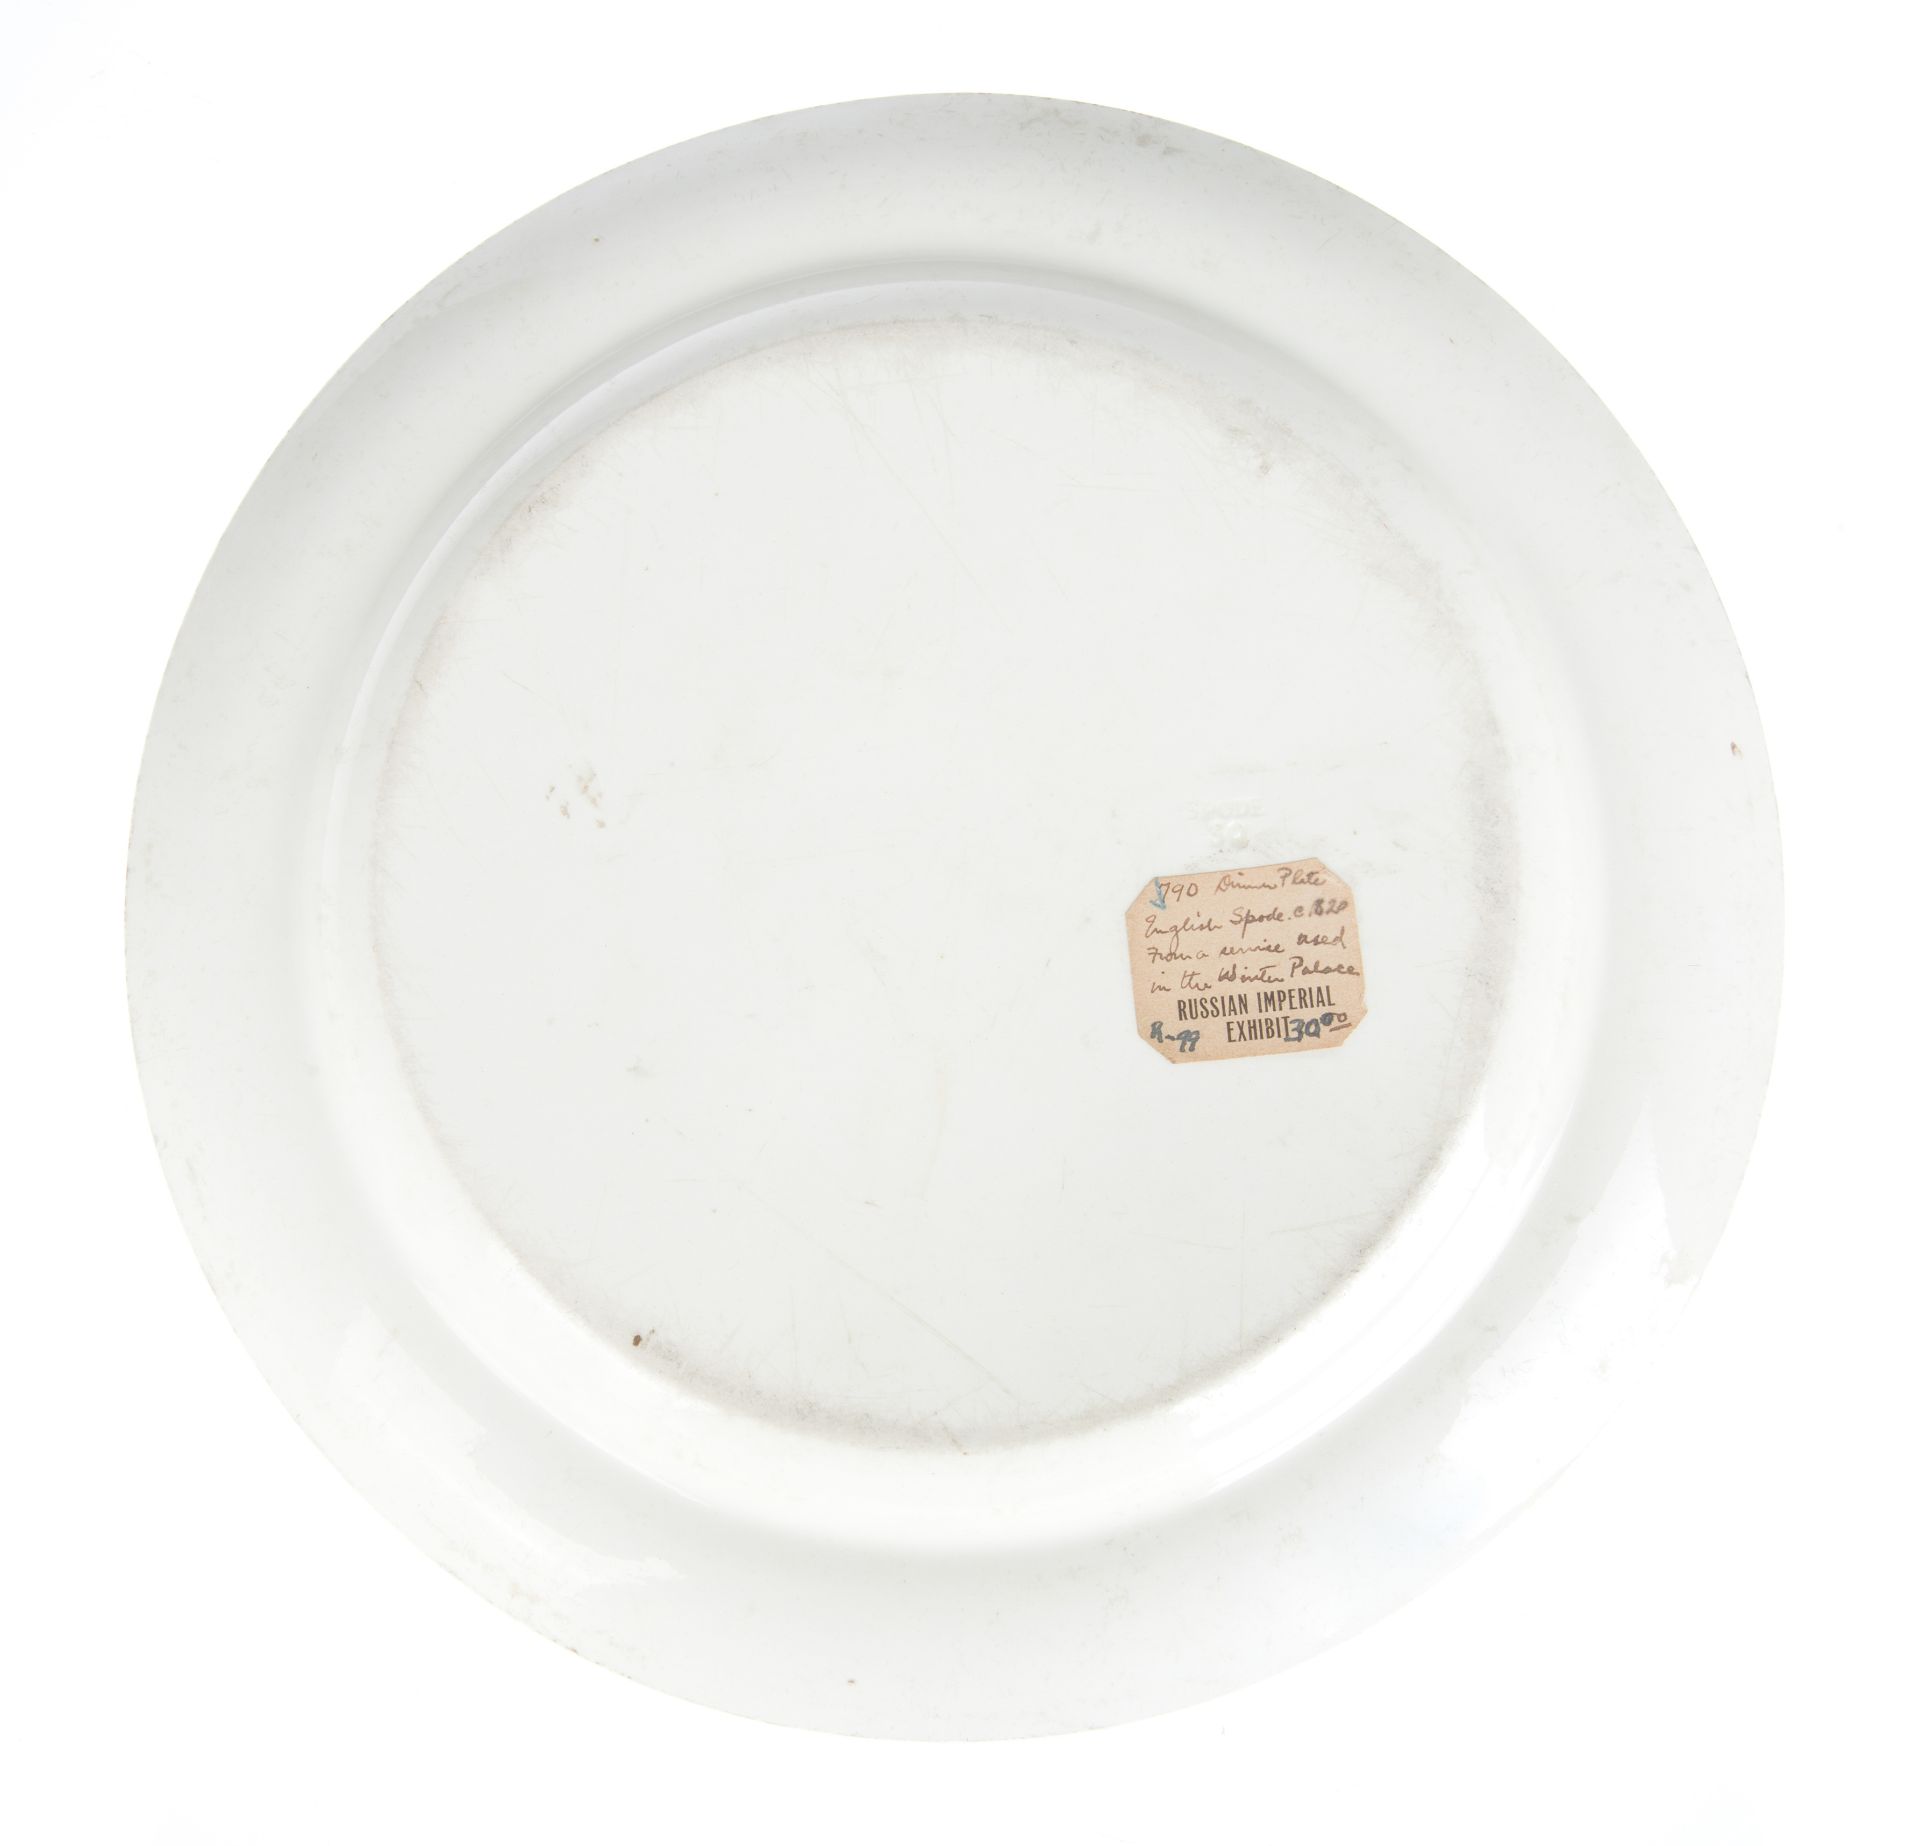 1820 SPODE PORCELAIN PLATE [WINTER PALACE ST PETERSBURG] - Image 2 of 3